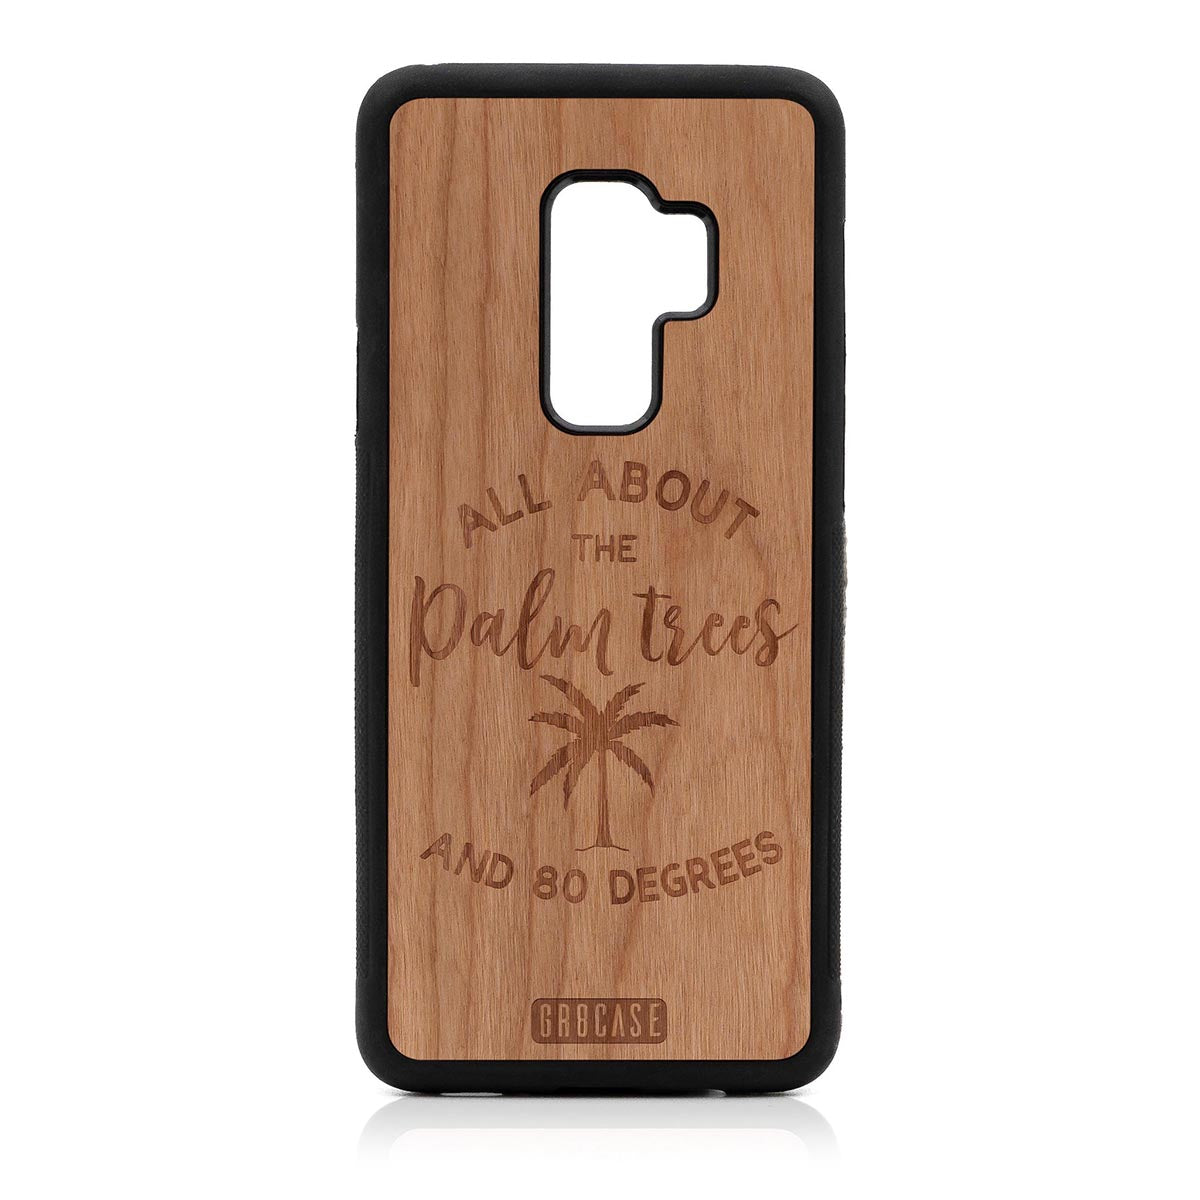 All About The Palm Trees and 80 Degrees Design Wood Case For Samsung Galaxy S9 Plus by GR8CASE